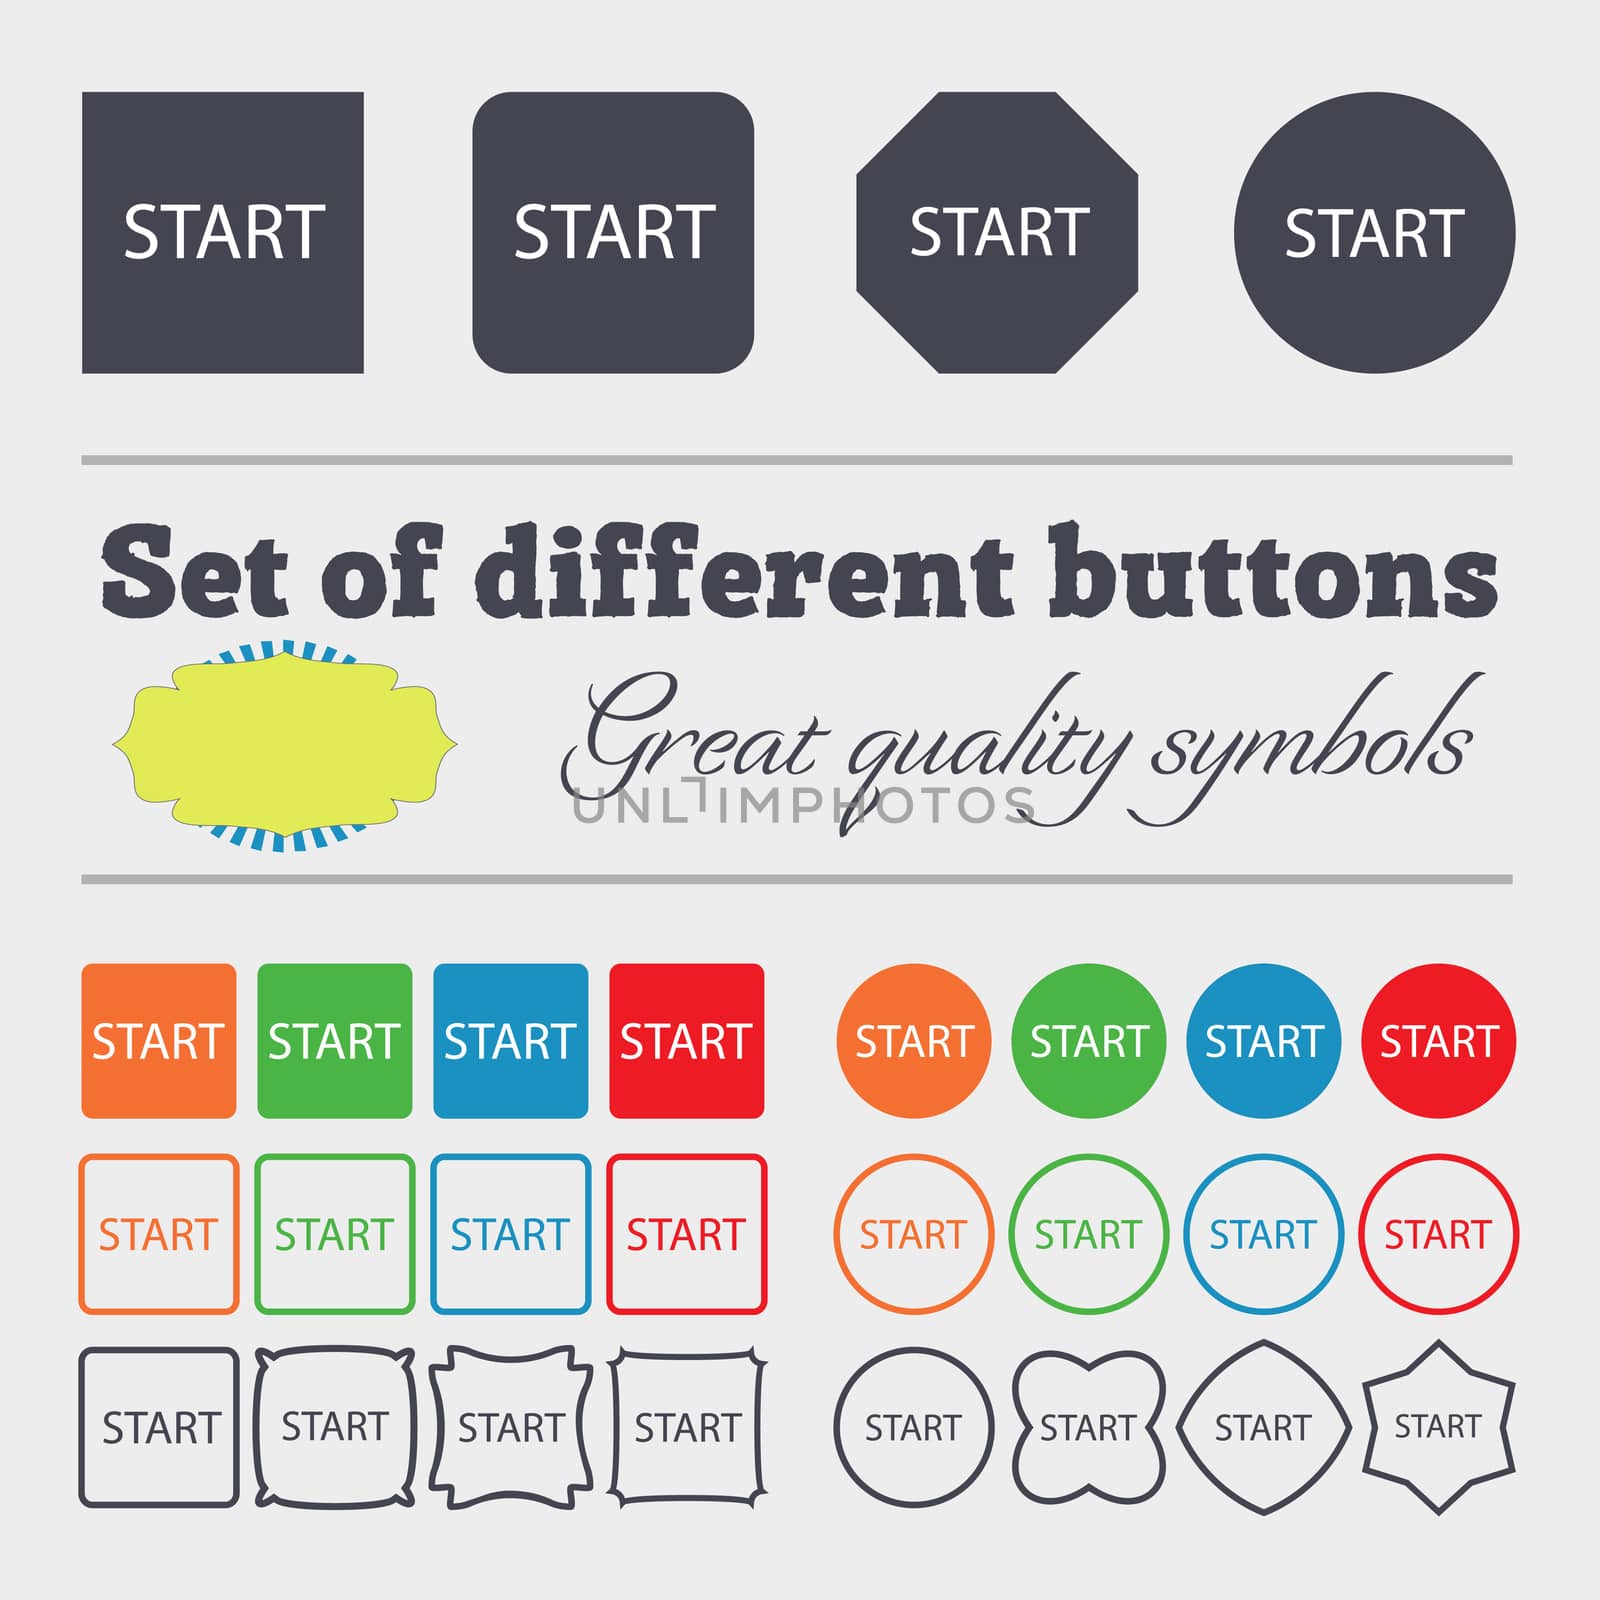 Start engine sign icon. Big set of colorful, diverse, high-quality buttons. illustration